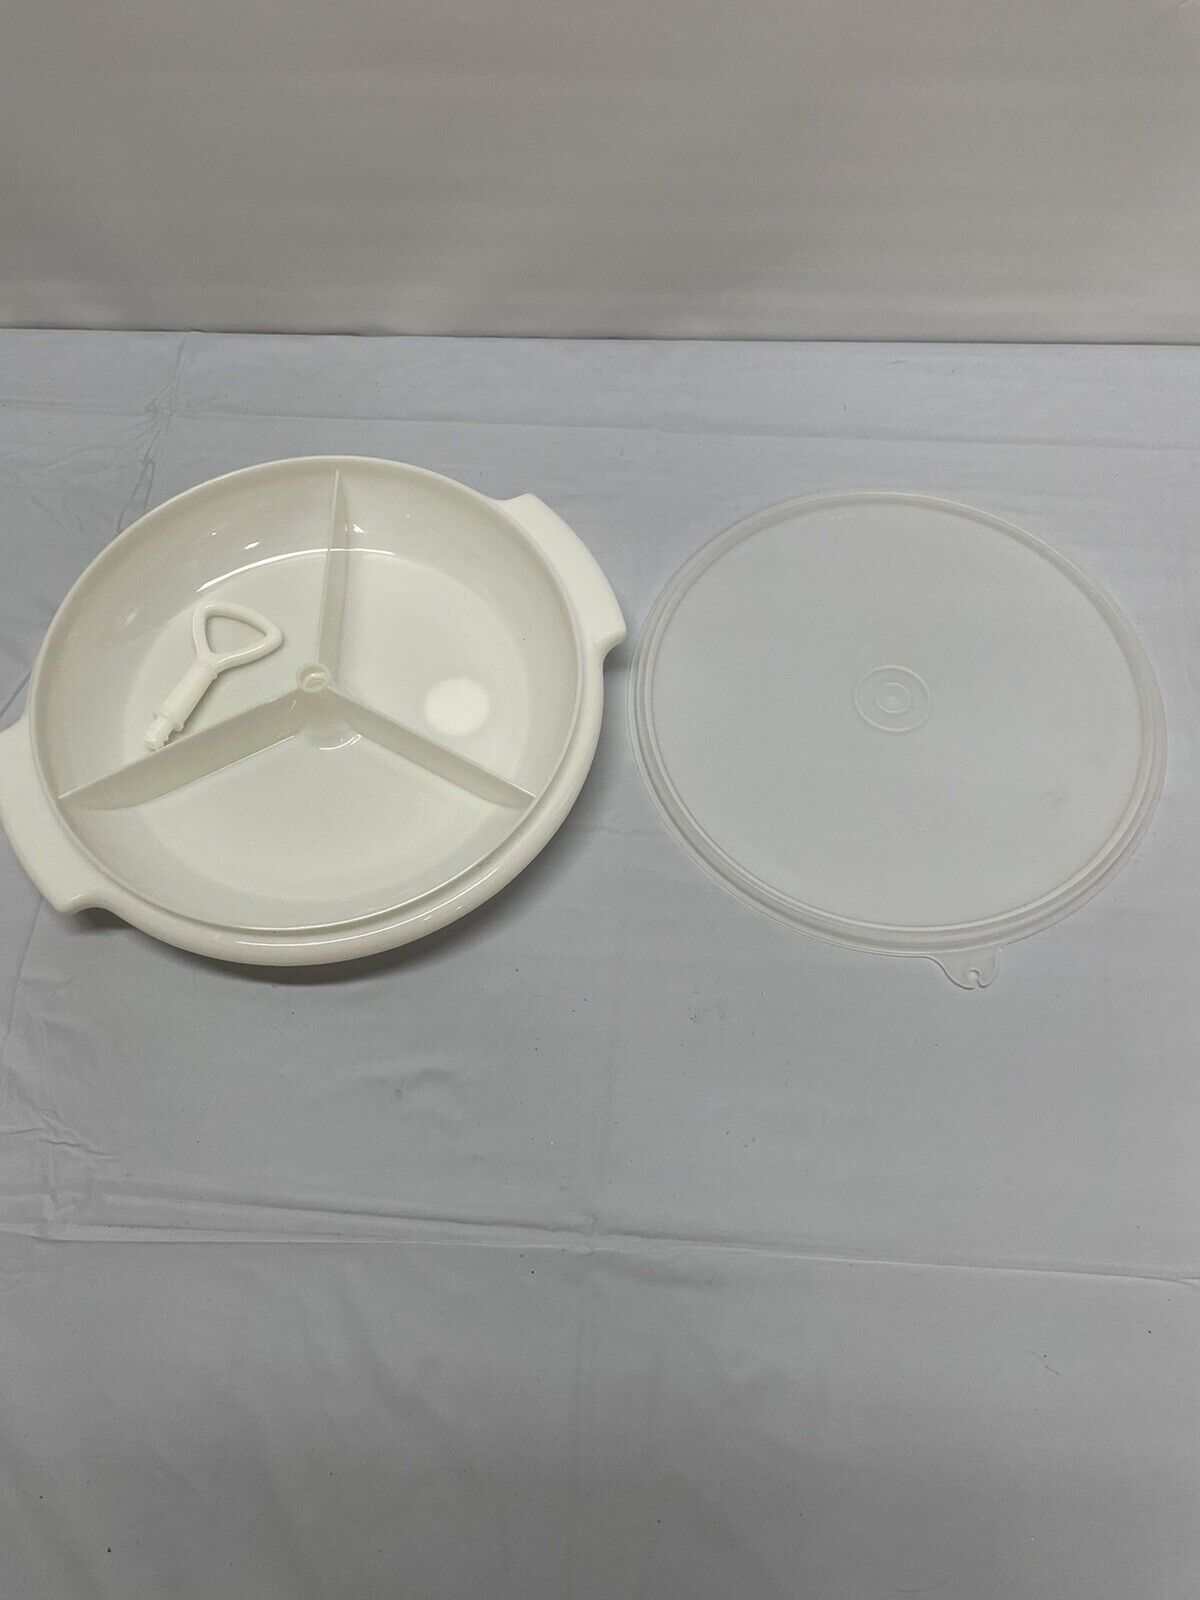 Tupperware vintage 3 compartment covered plate 